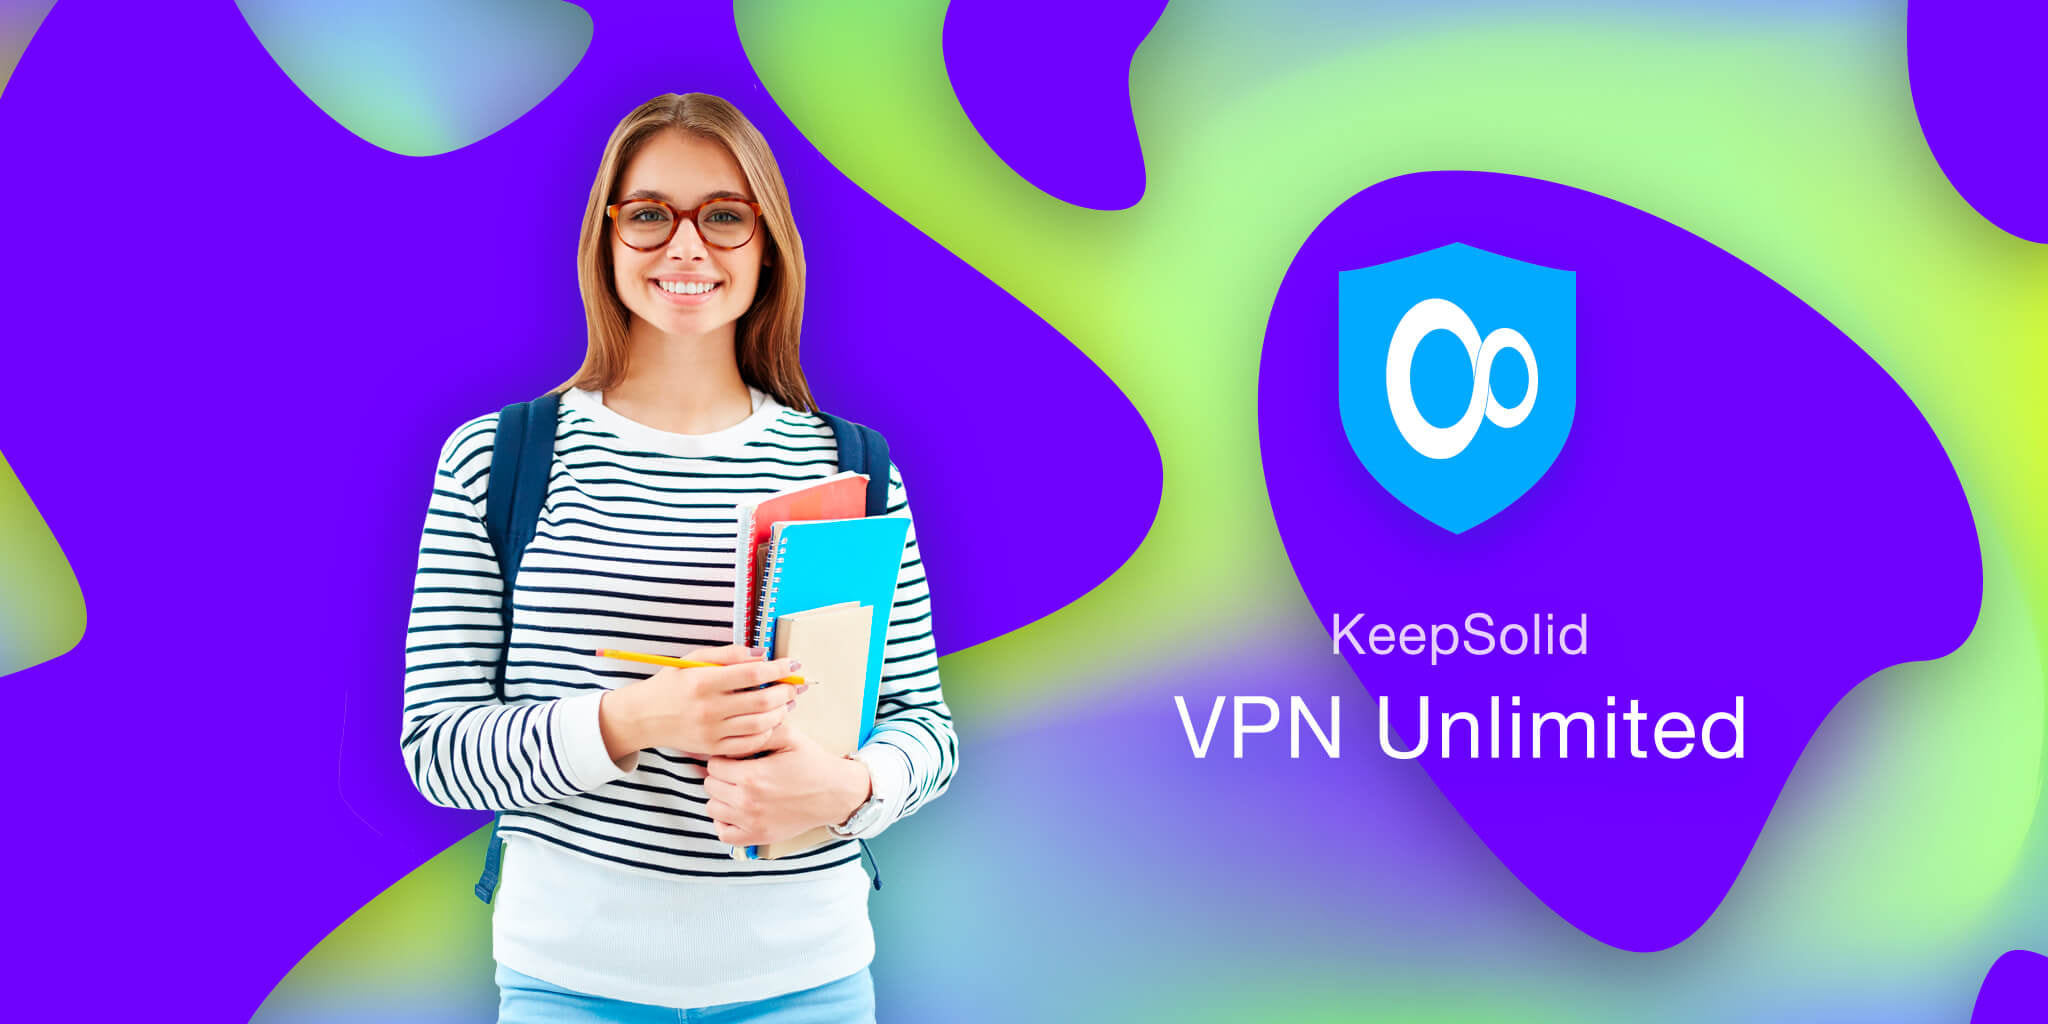 Female student smiling at camera and using VPN for college.